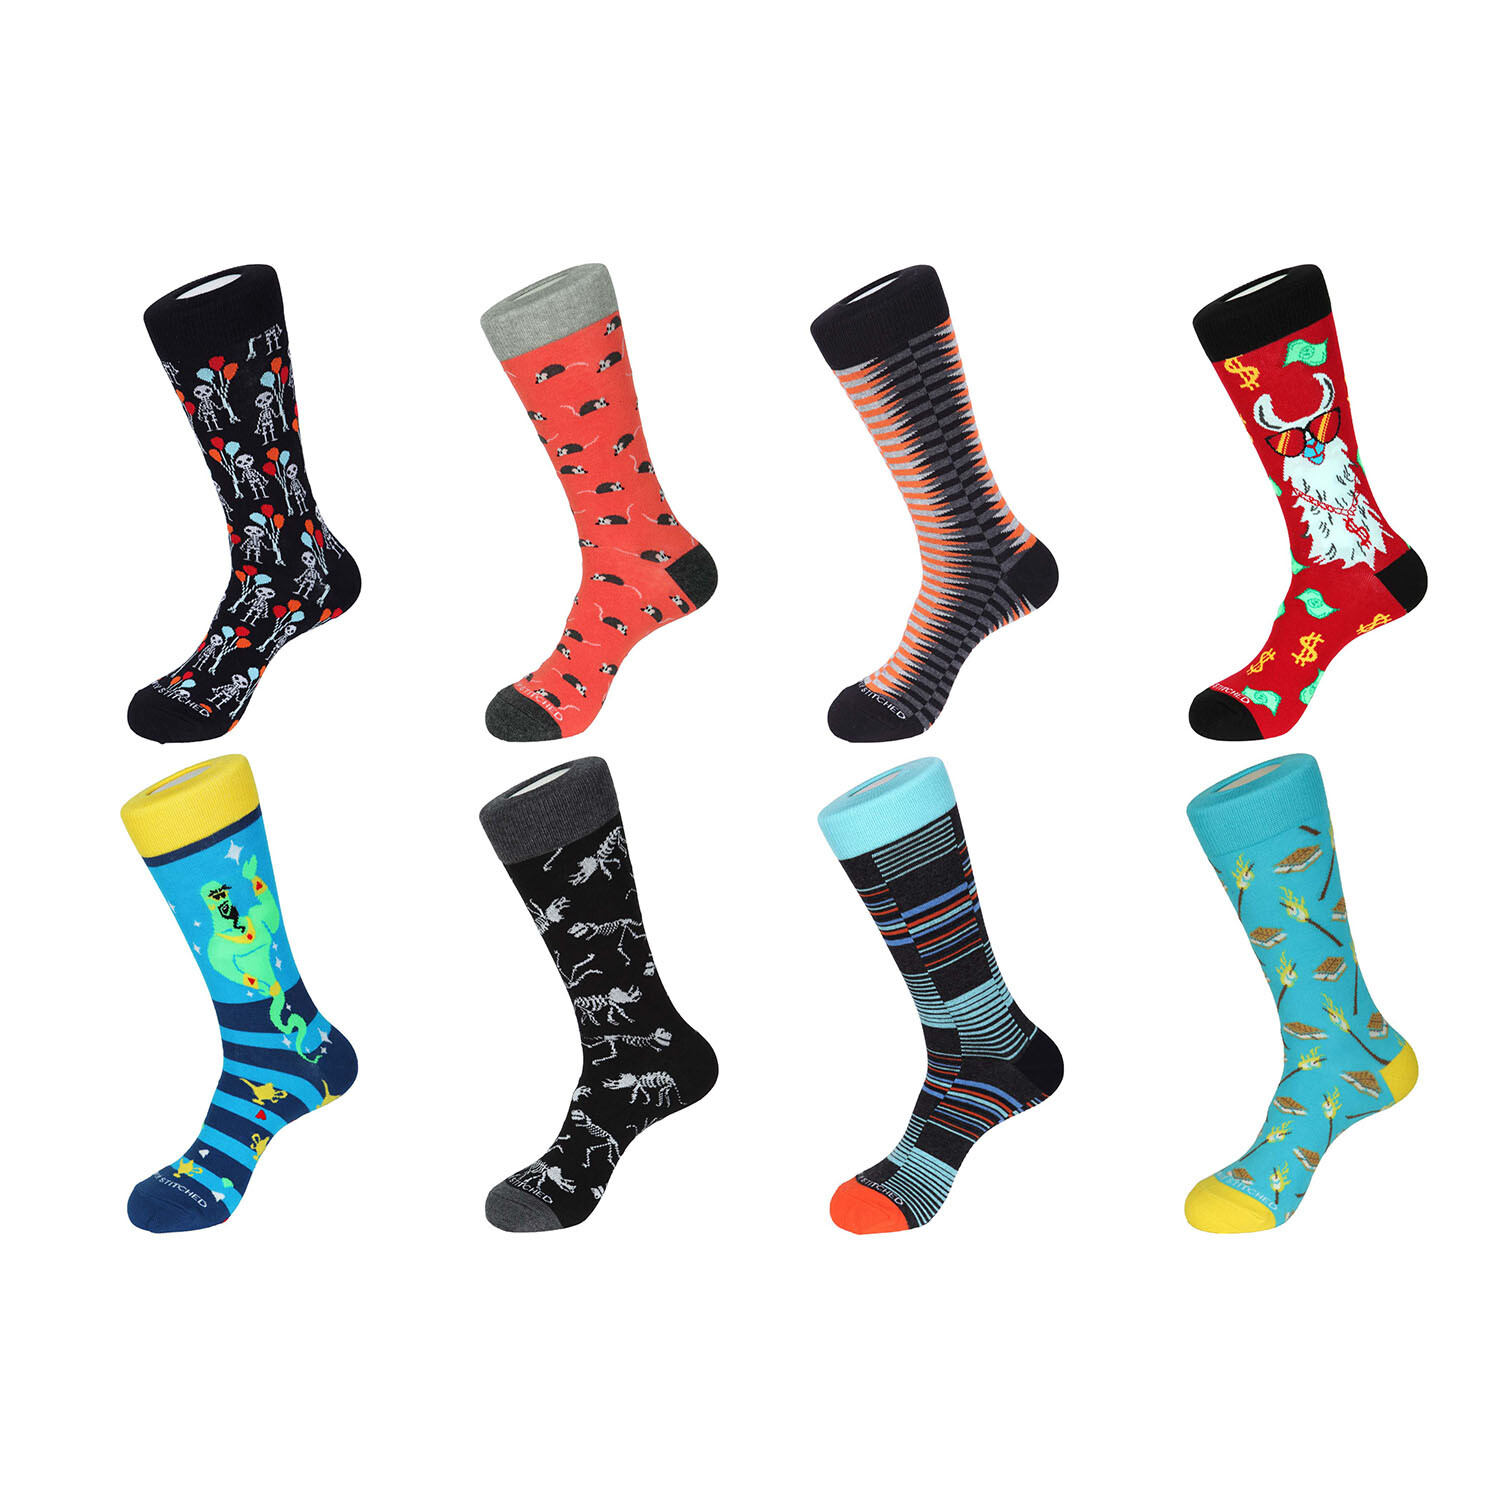 Hoo-Koo-E-Koo Crew Socks // 8 Pack - Unsimply Stitched - Touch of Modern